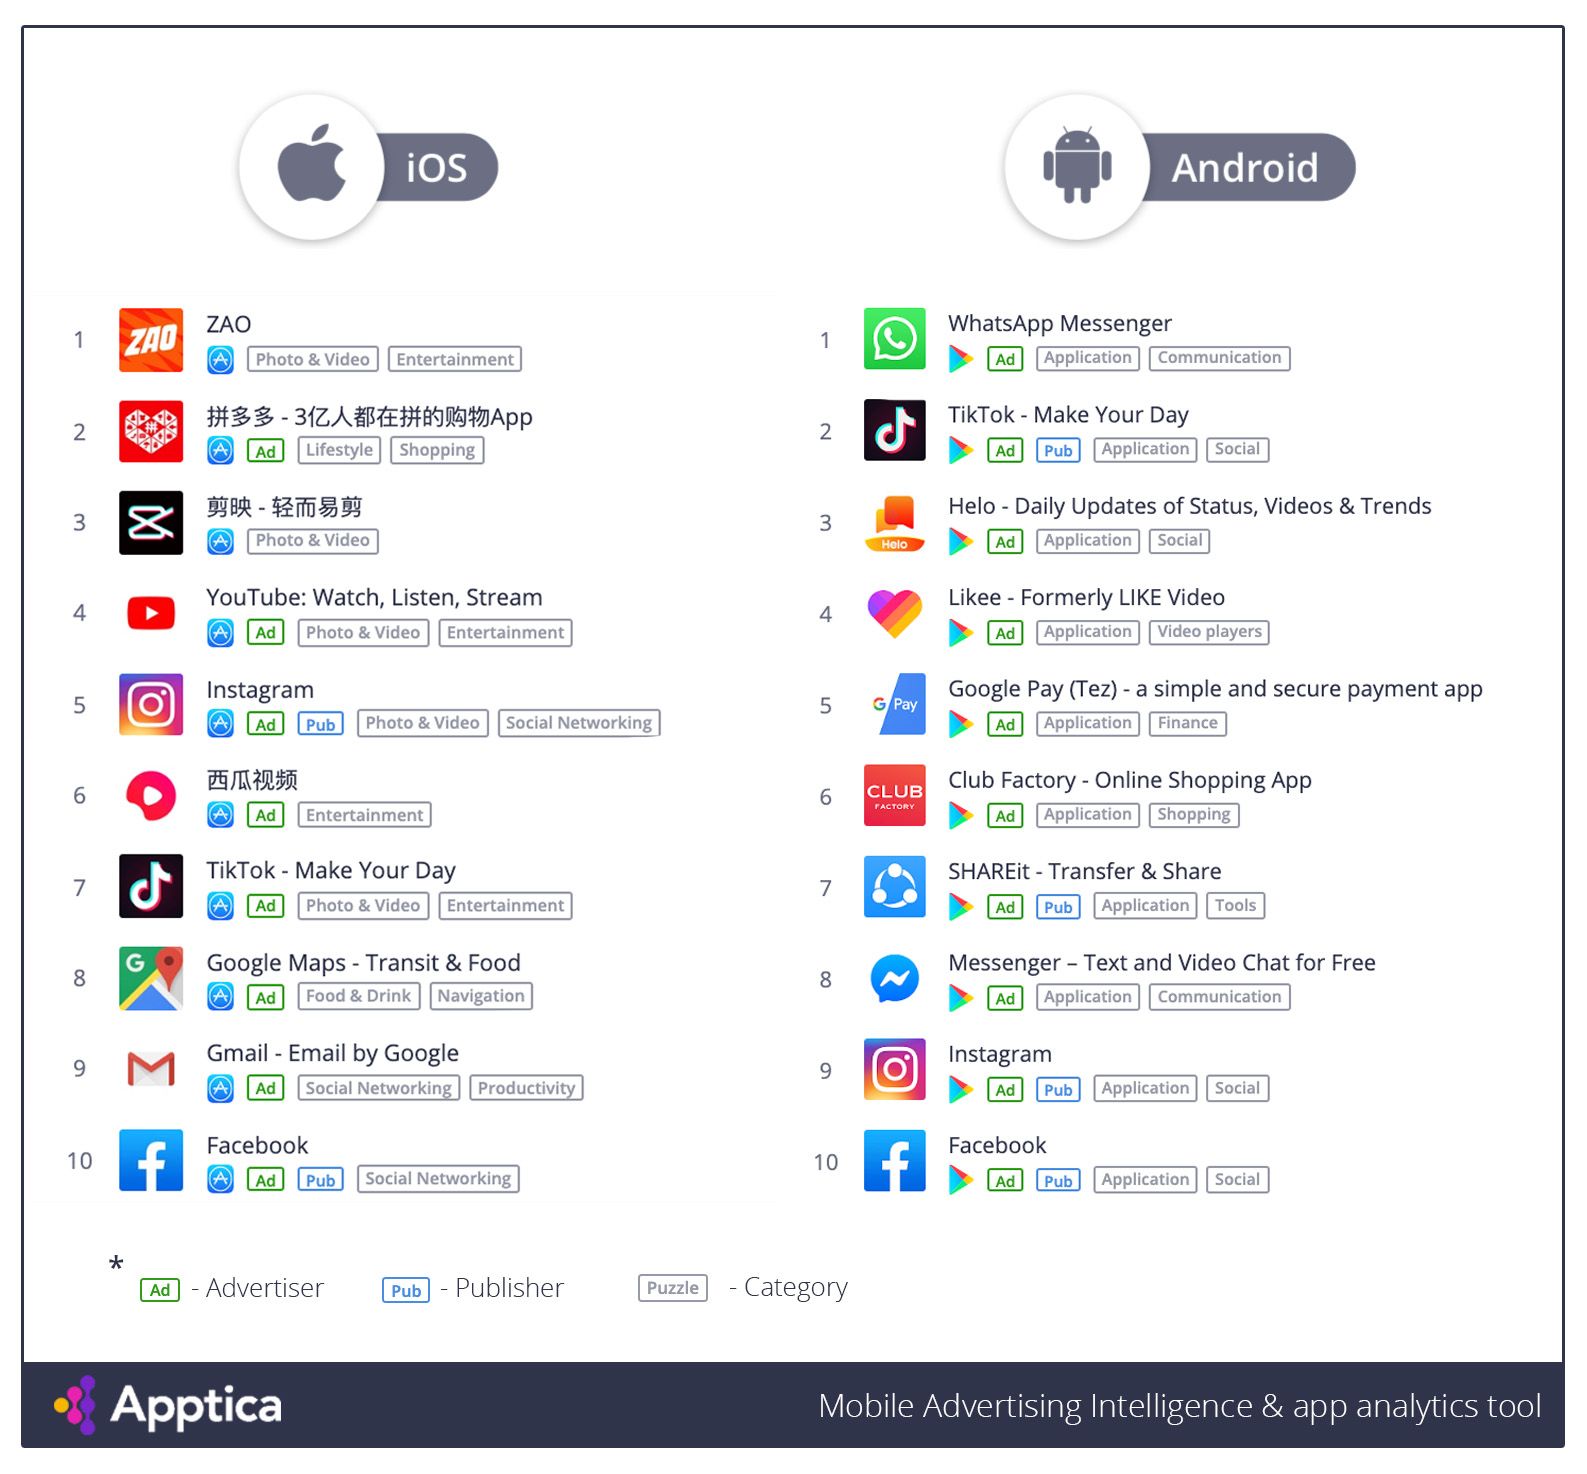 Top Applications by downloads for September 2019